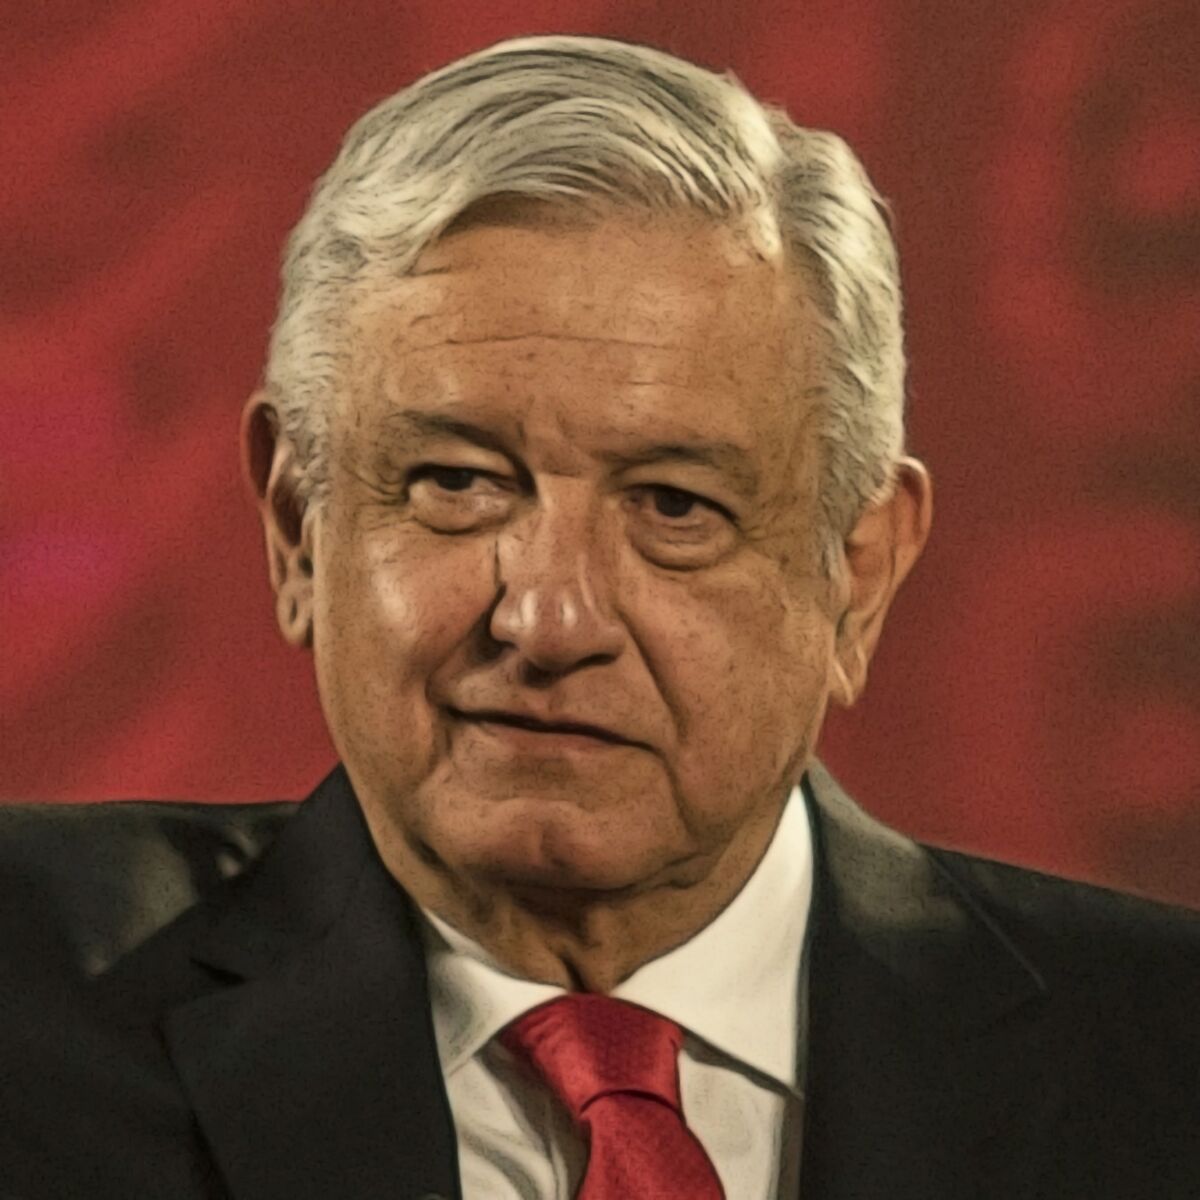 Mexico’s AMLO Joins Peru's List of Shunned Leftist Leaders - Bloomberg